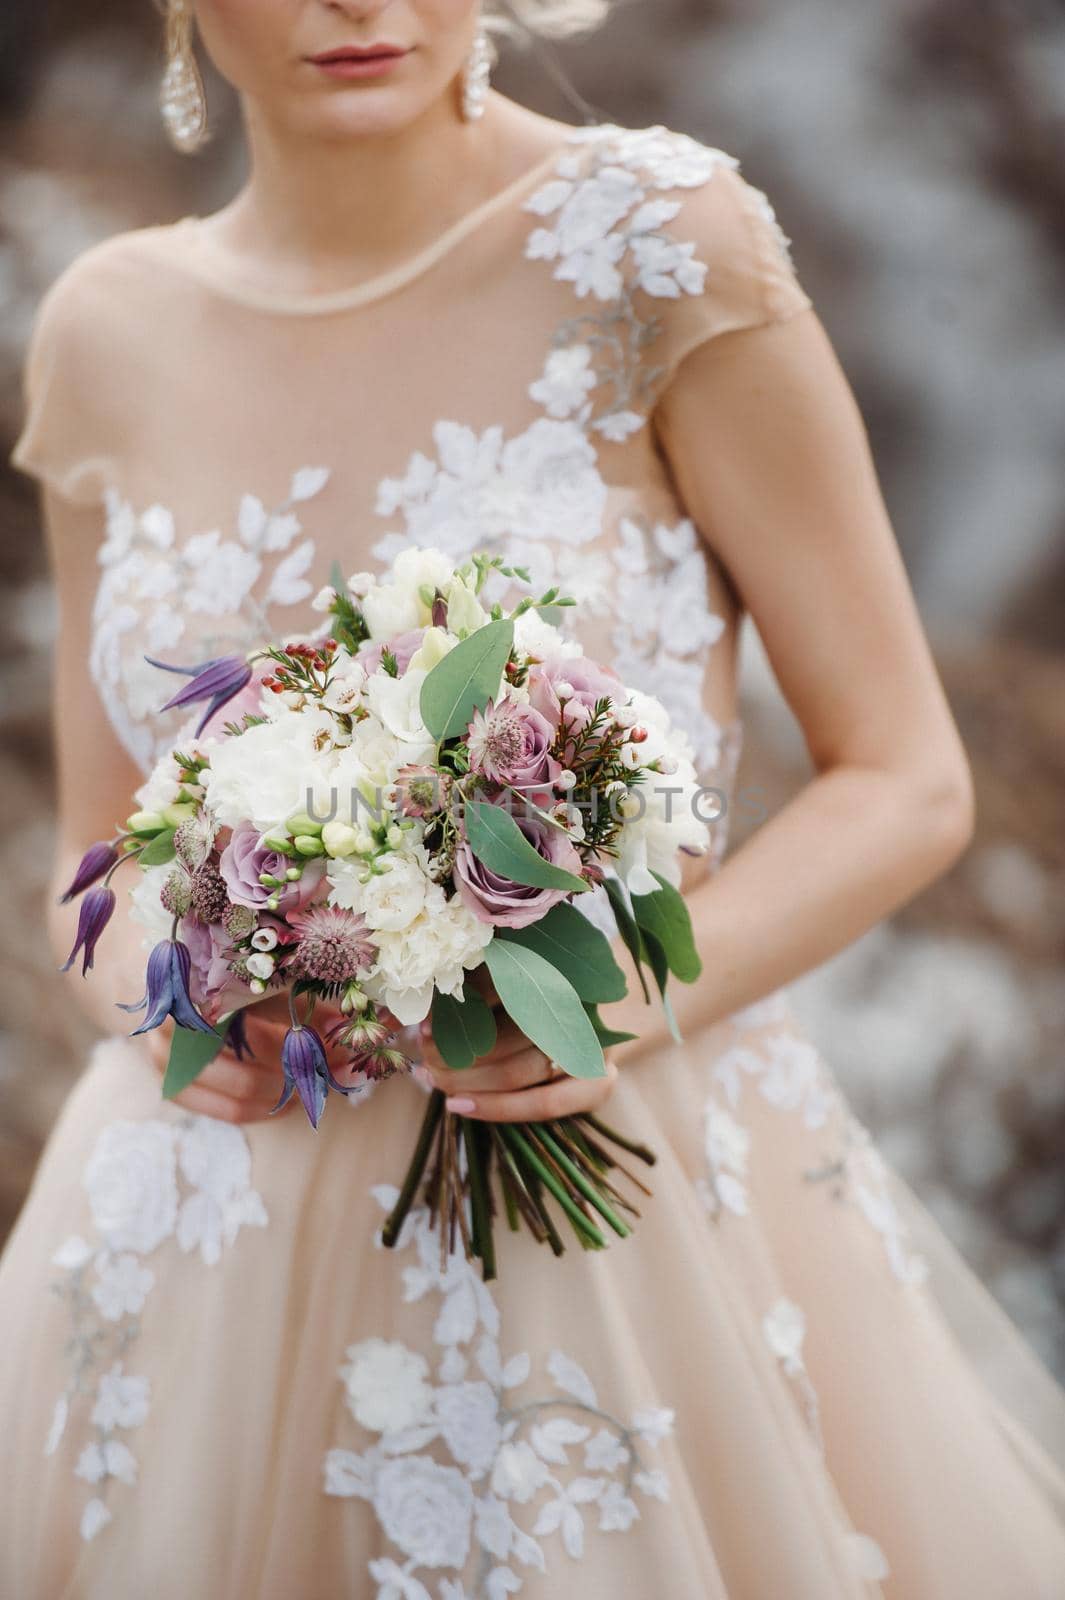 wedding bouquet with peonies in the hands of the bride under the veil.Morning of the bride by Lobachad